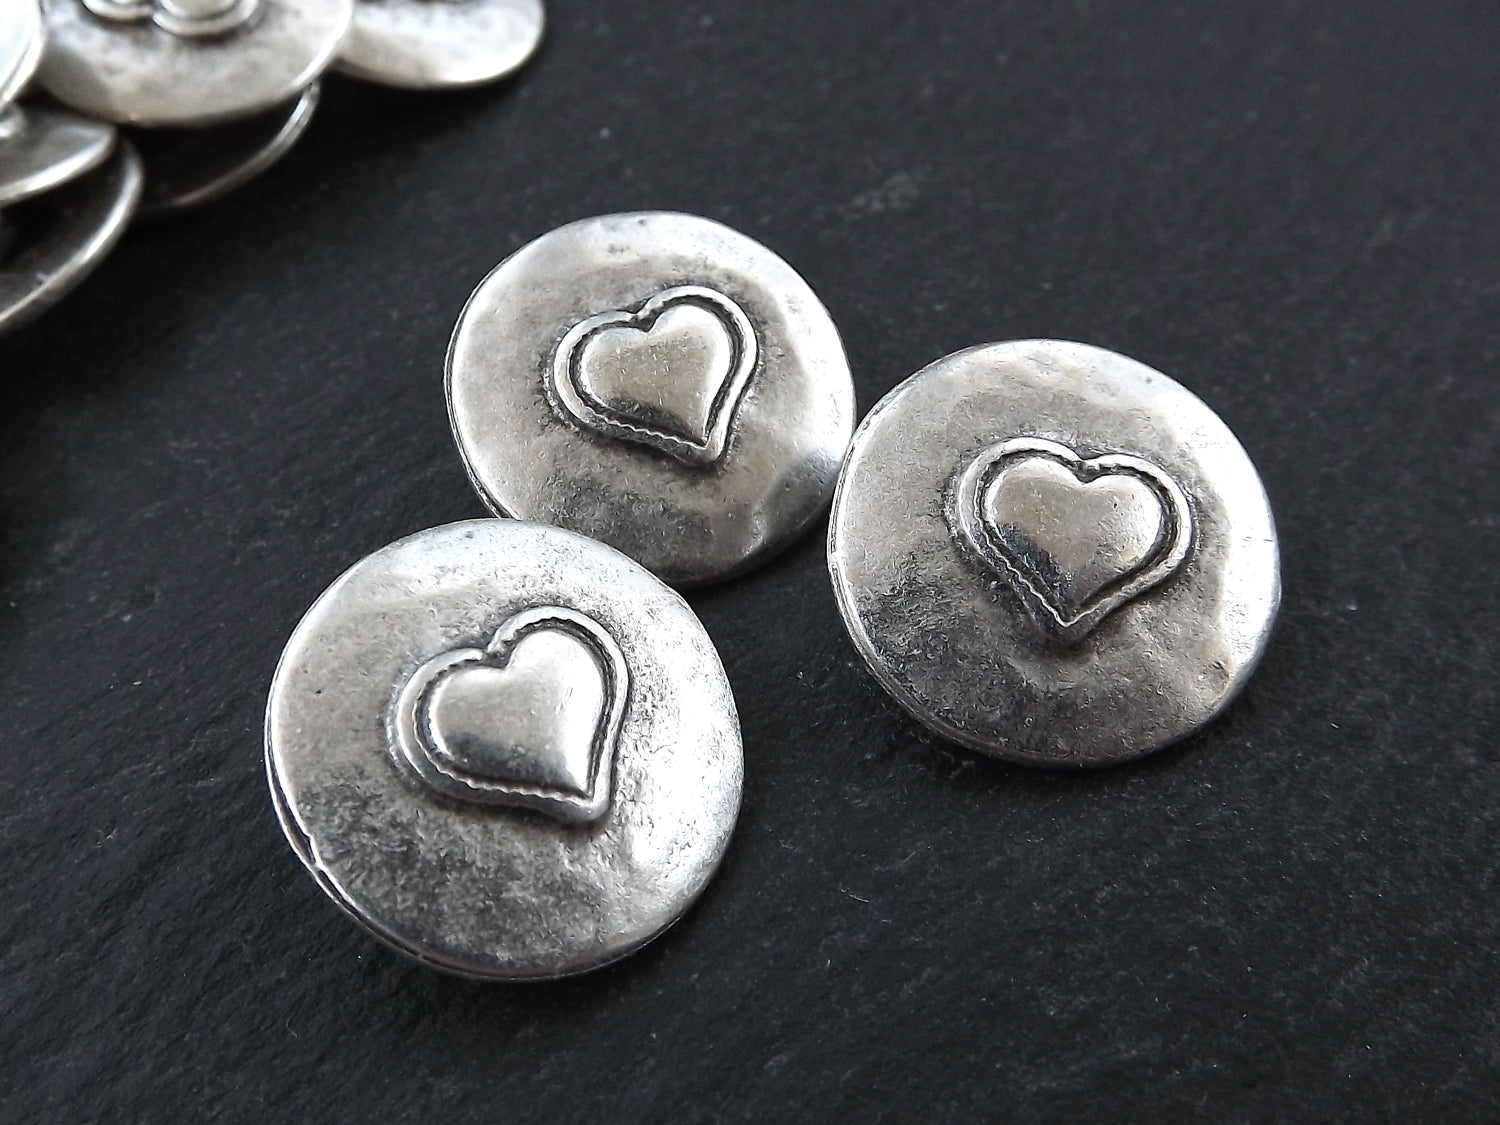 3 Rustic Metal Heart Buttons Matte Antique Silver Plated - Round Silver Buttons, Metal Shank Button, Sewing Buttons, Jewelry Making Buttons